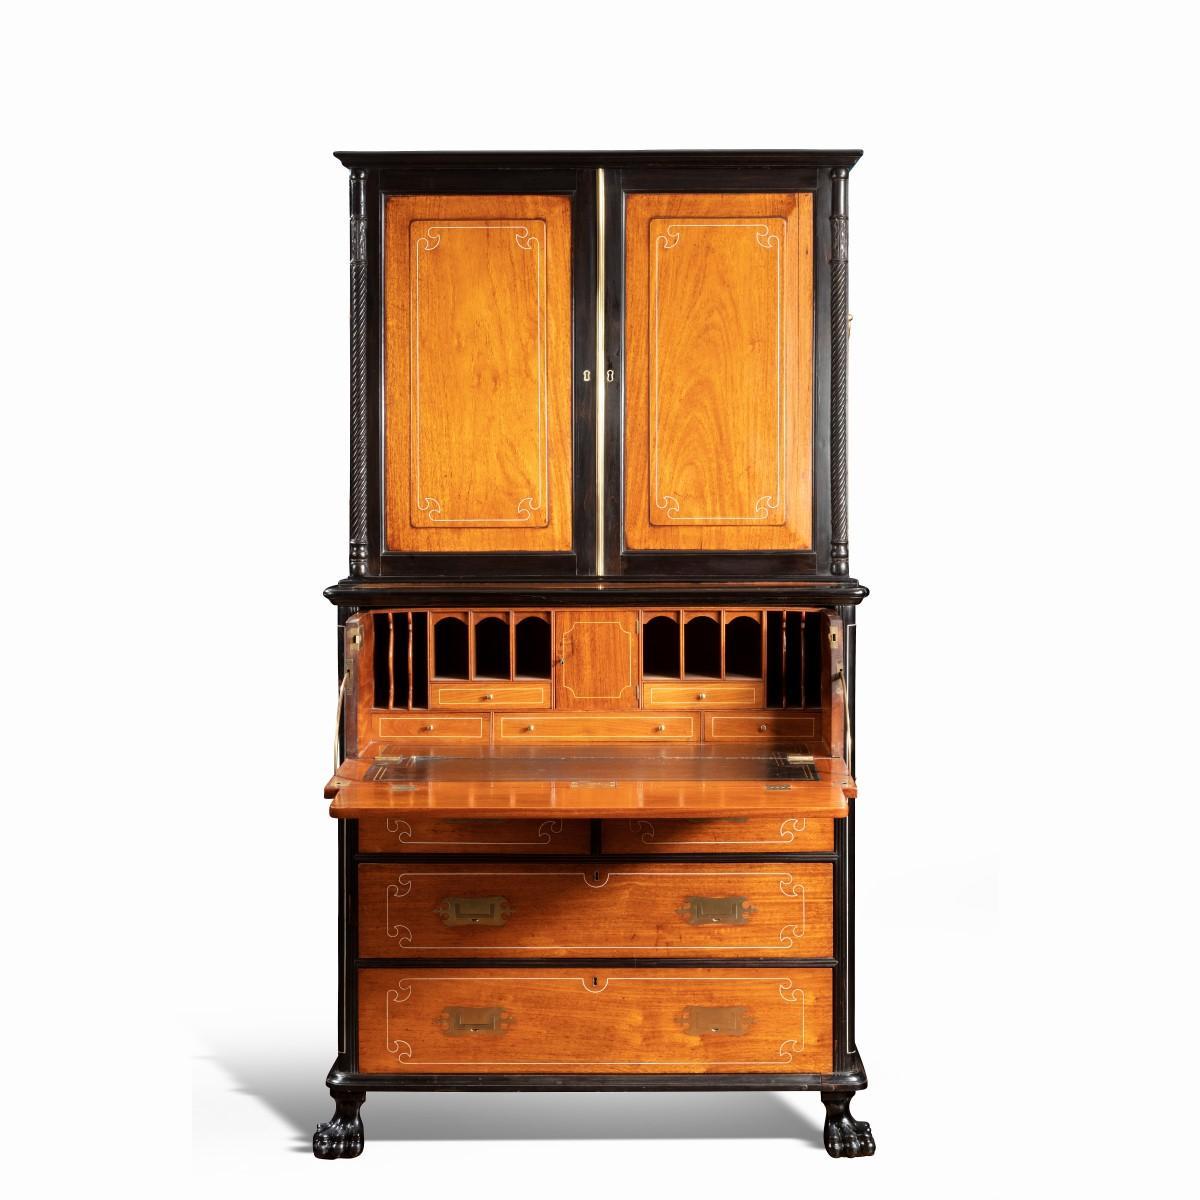 An Anglo-Chinese camphor and ebony campaign secretaire bookcase, of rectangular form in two sections, each with carrying handles, the upper section with cupboard doors which open to reveal two adjustable shelves, the lower section with a secretaire